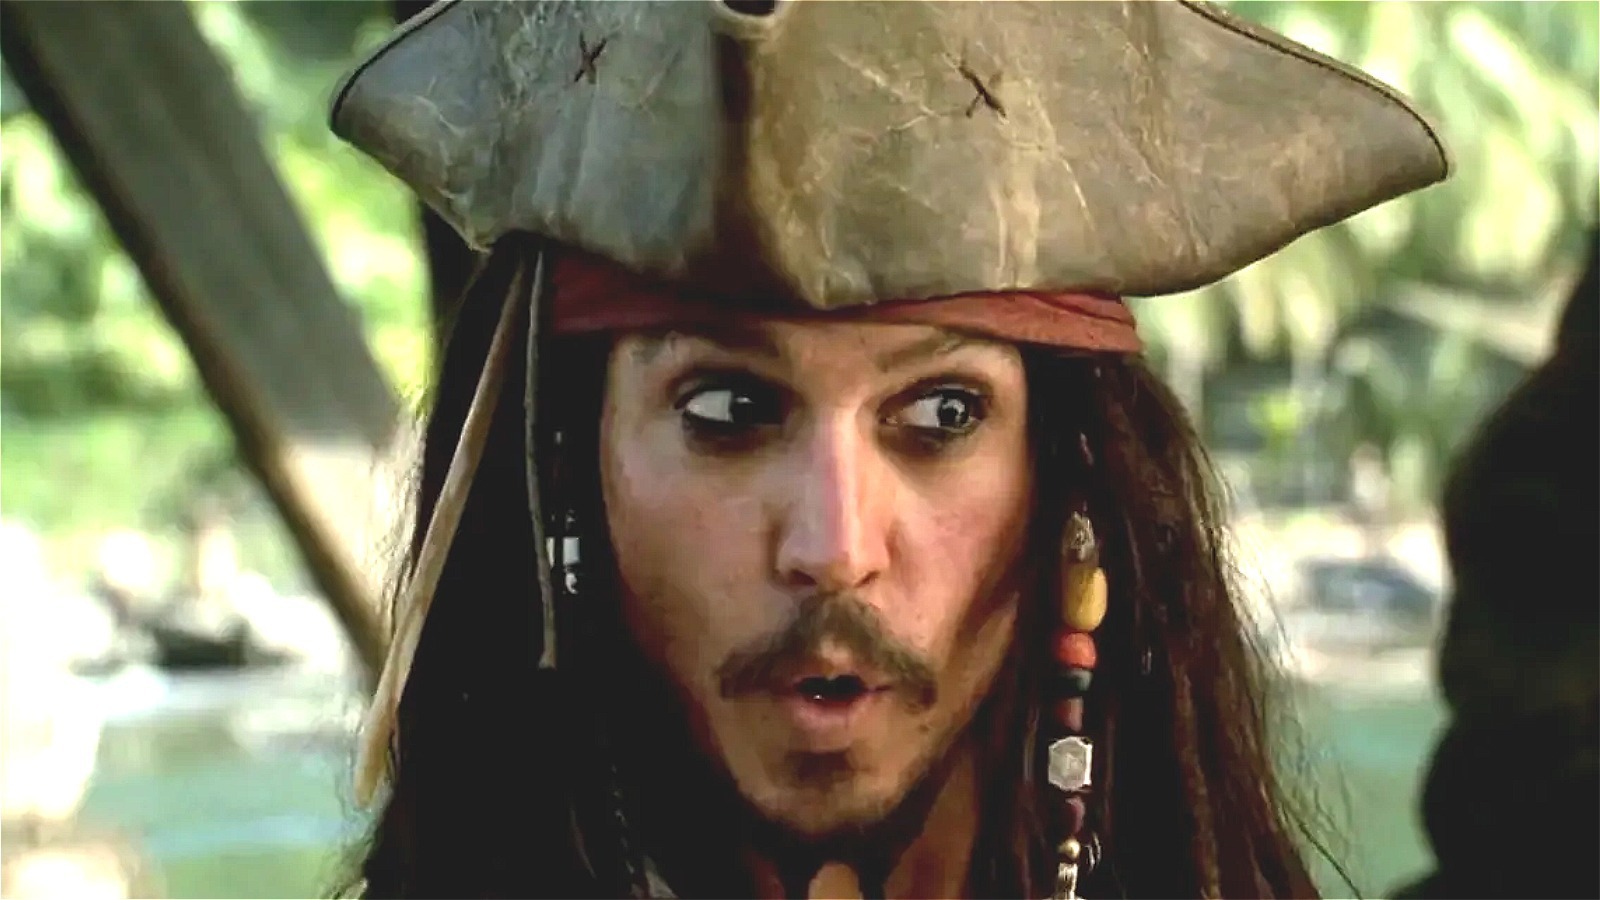 Jack Sparrow will be replaced by female lead in Pirates of the